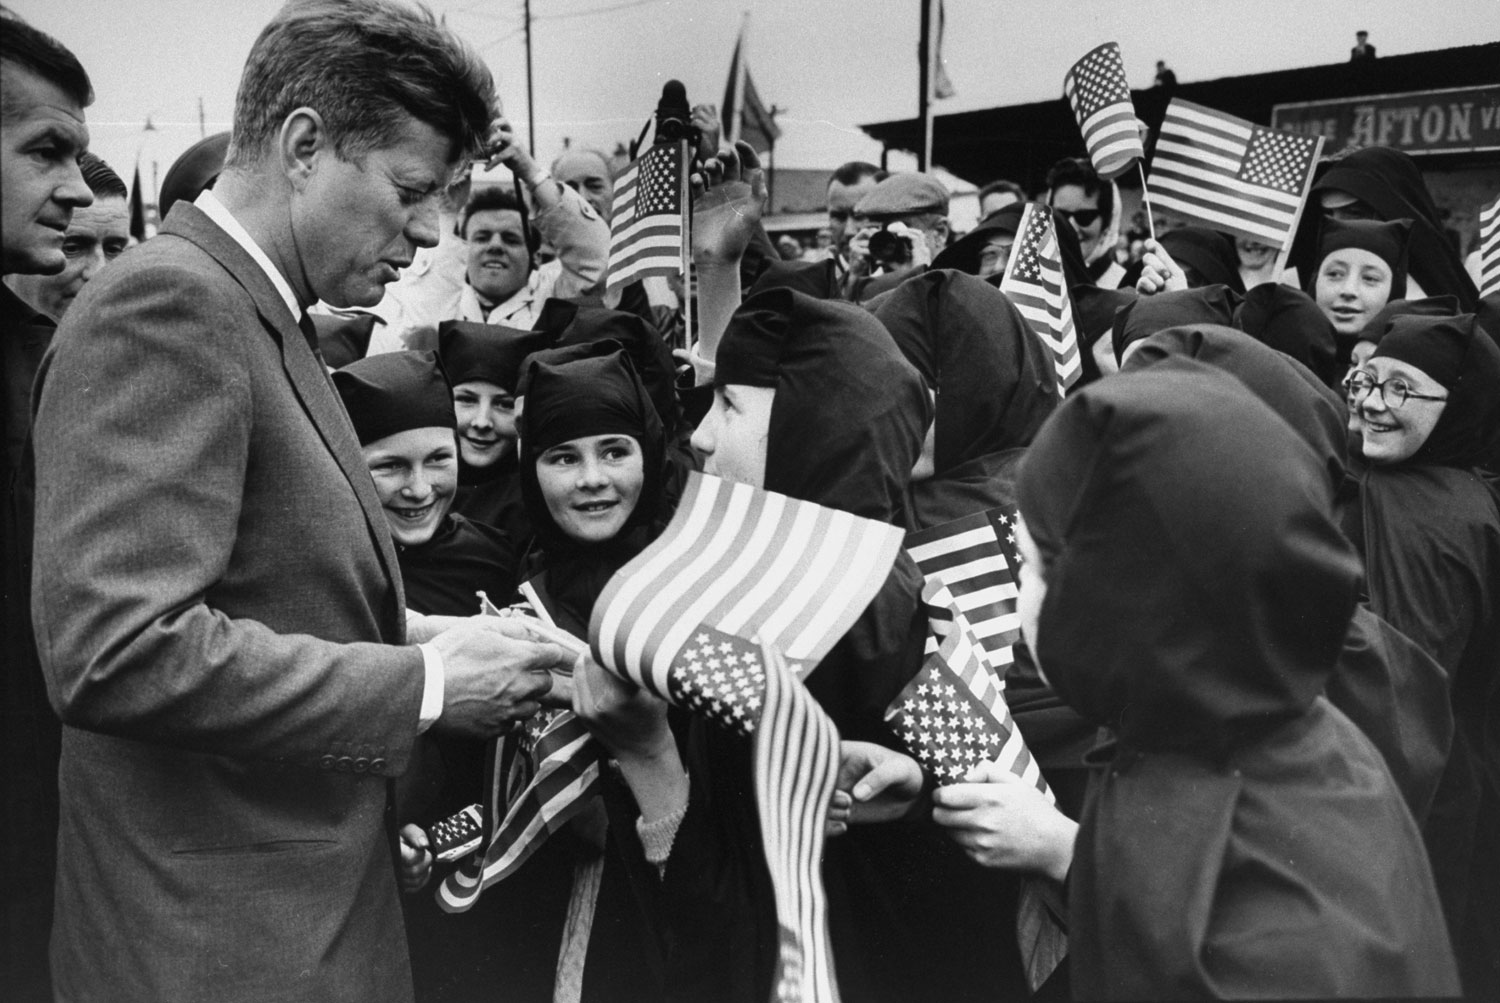 President John Kennedy signs autographs during his landmark visit to Ireland in June 1963.